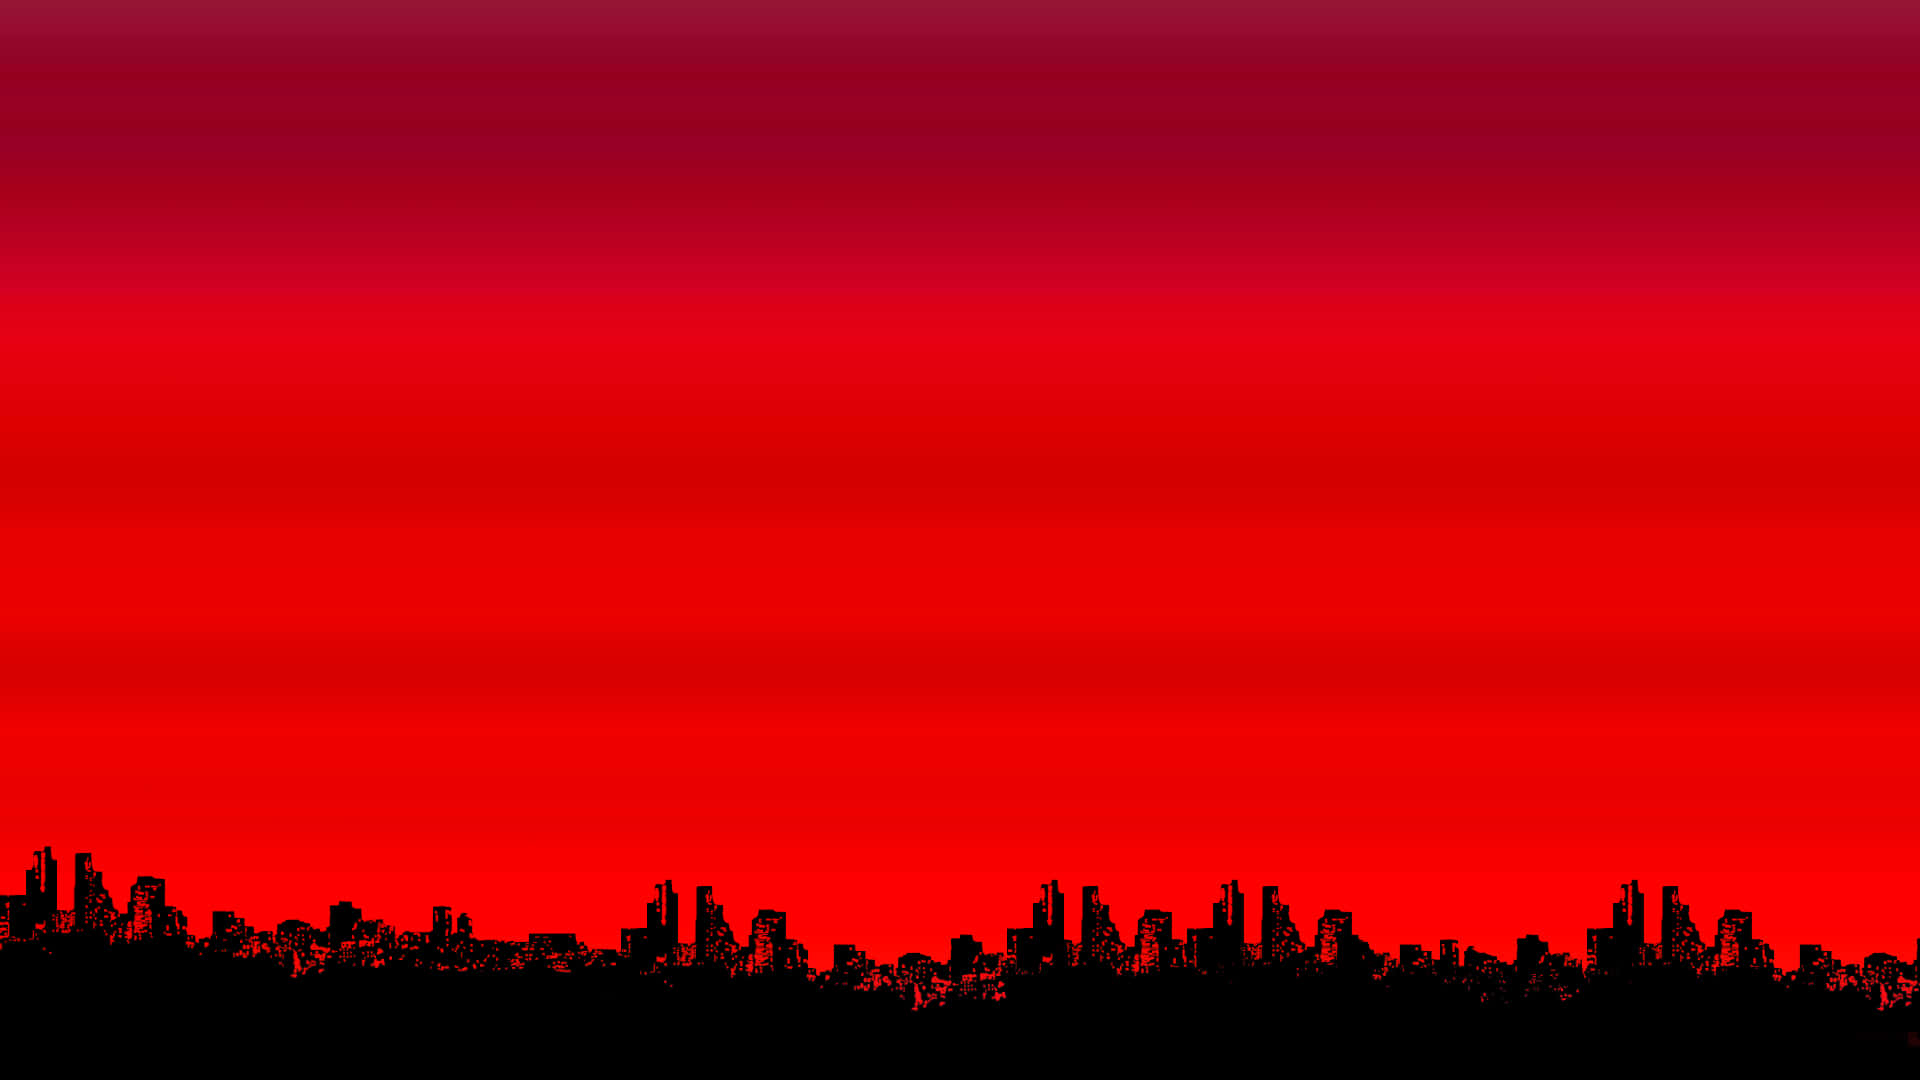 1920x1080 Red City Silhouette Wallpaper